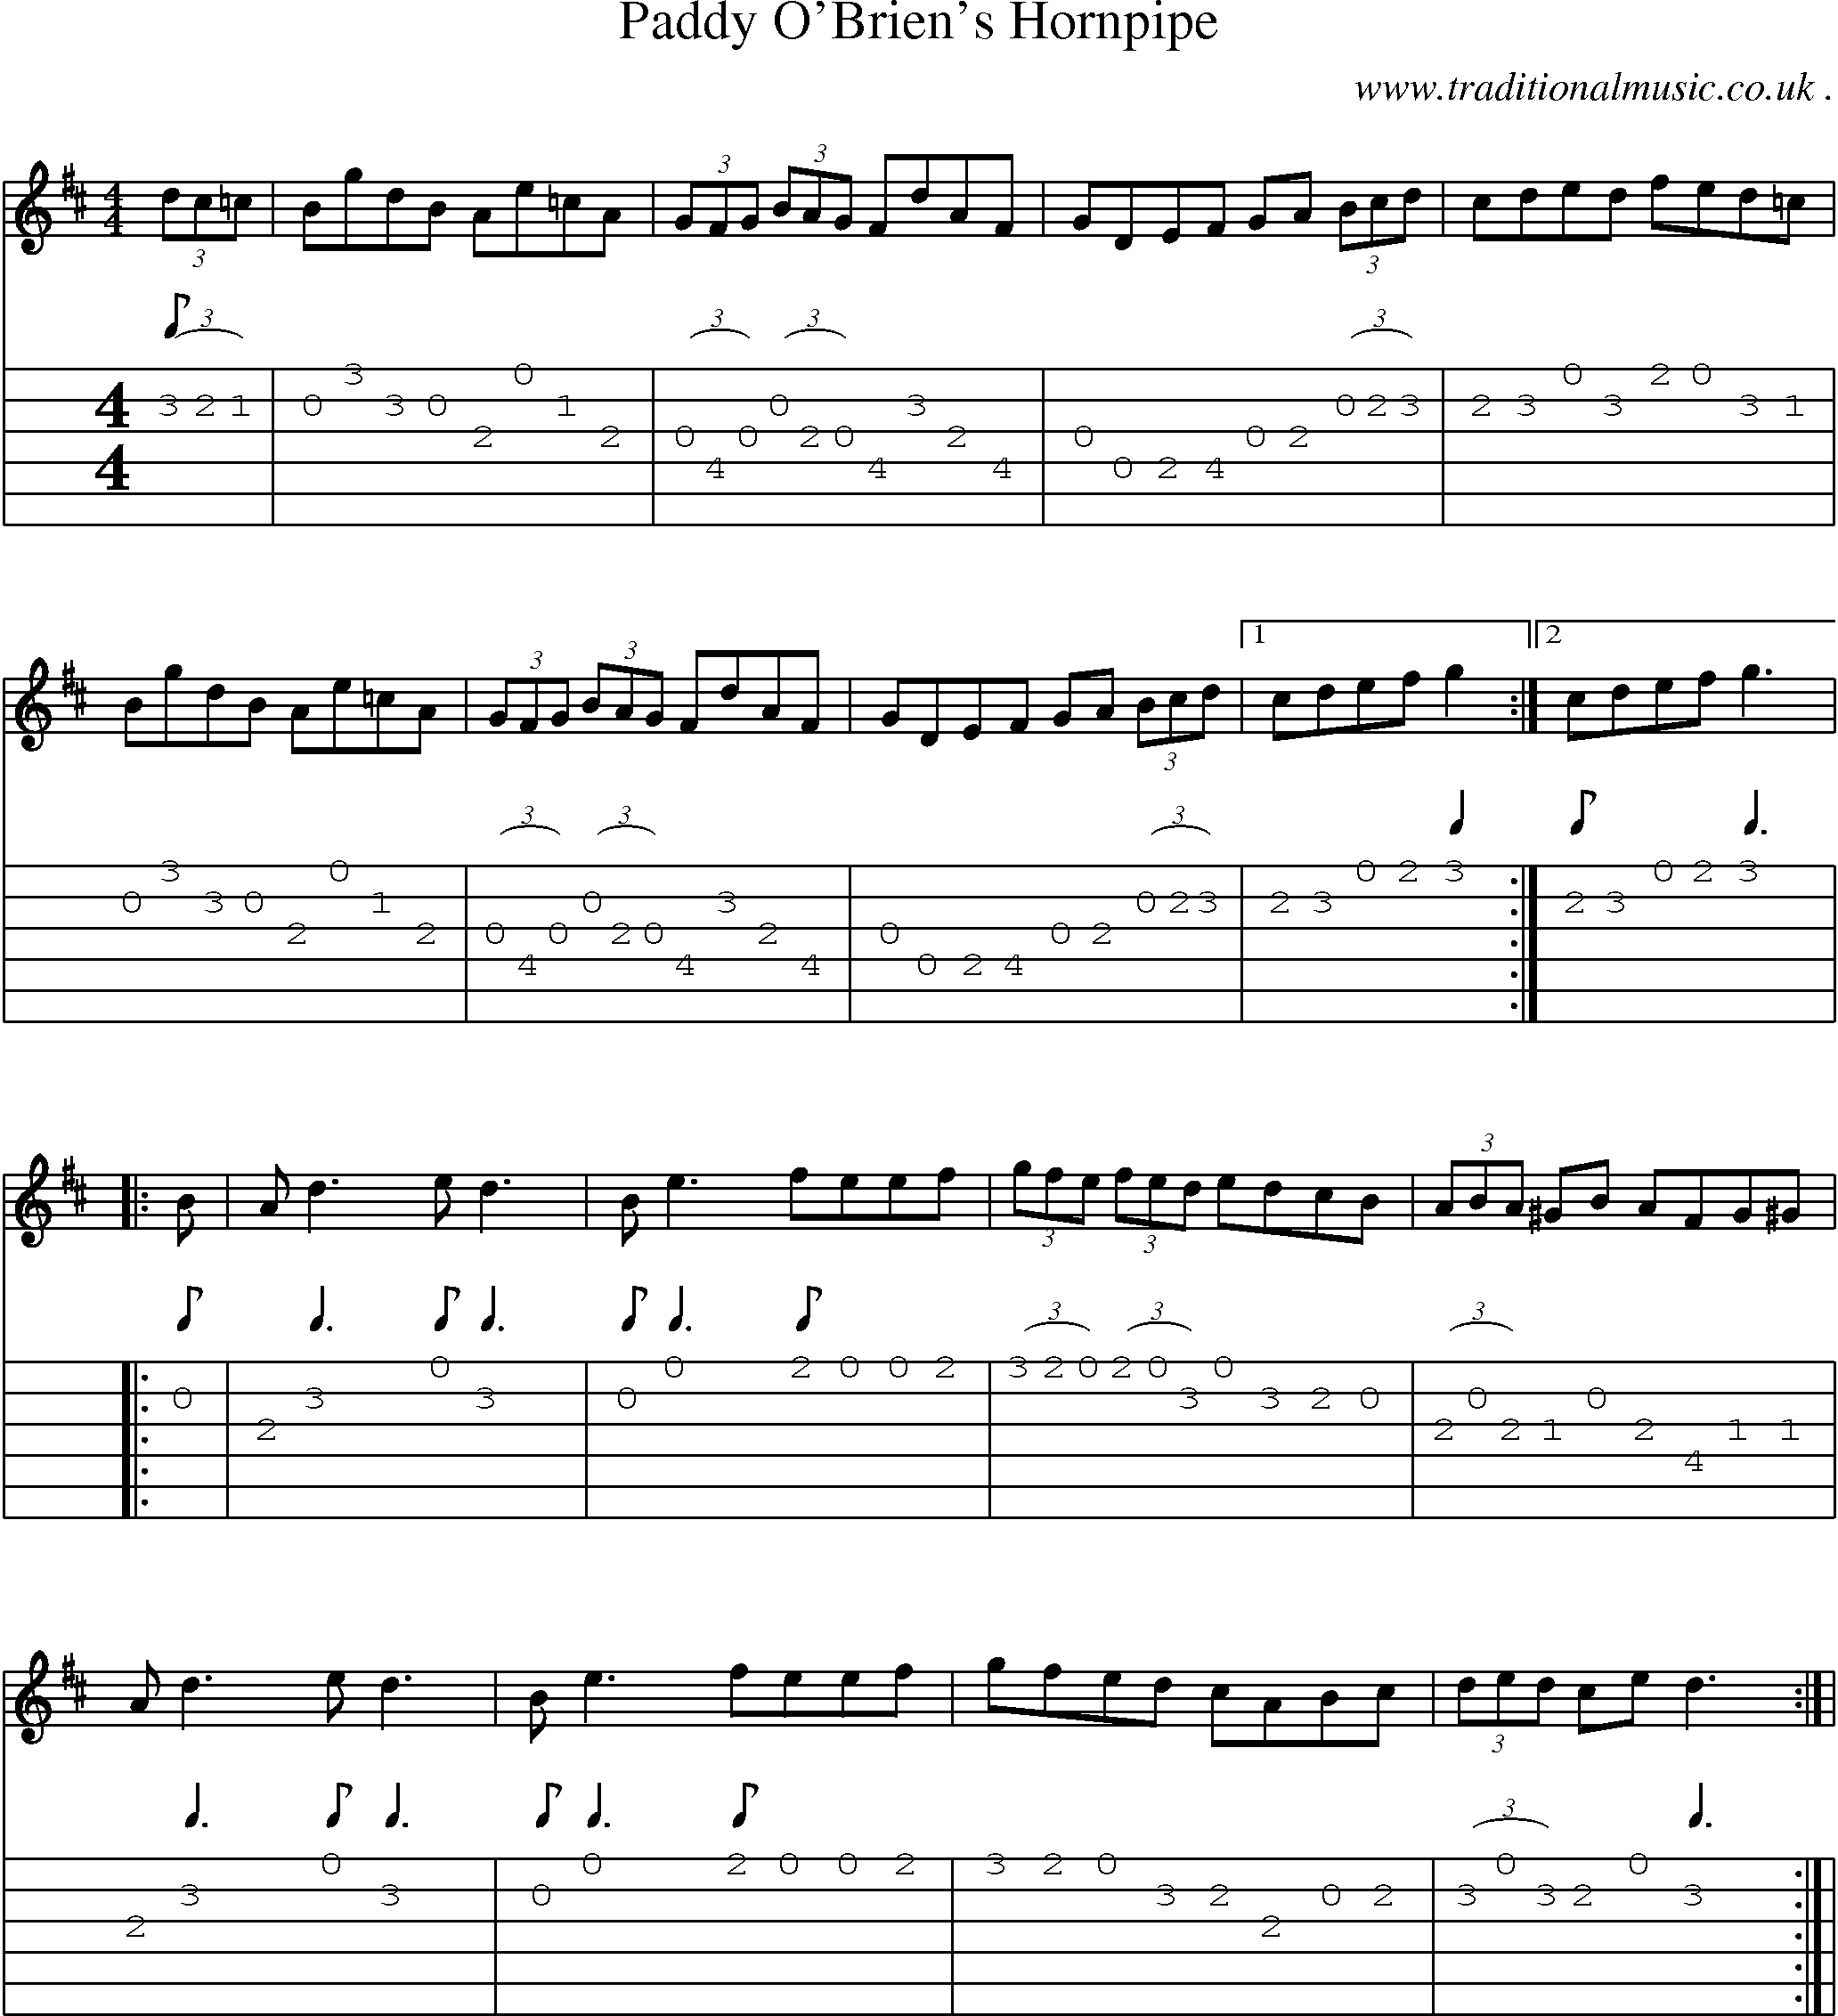 Sheet-Music and Guitar Tabs for Paddy Obriens Hornpipe